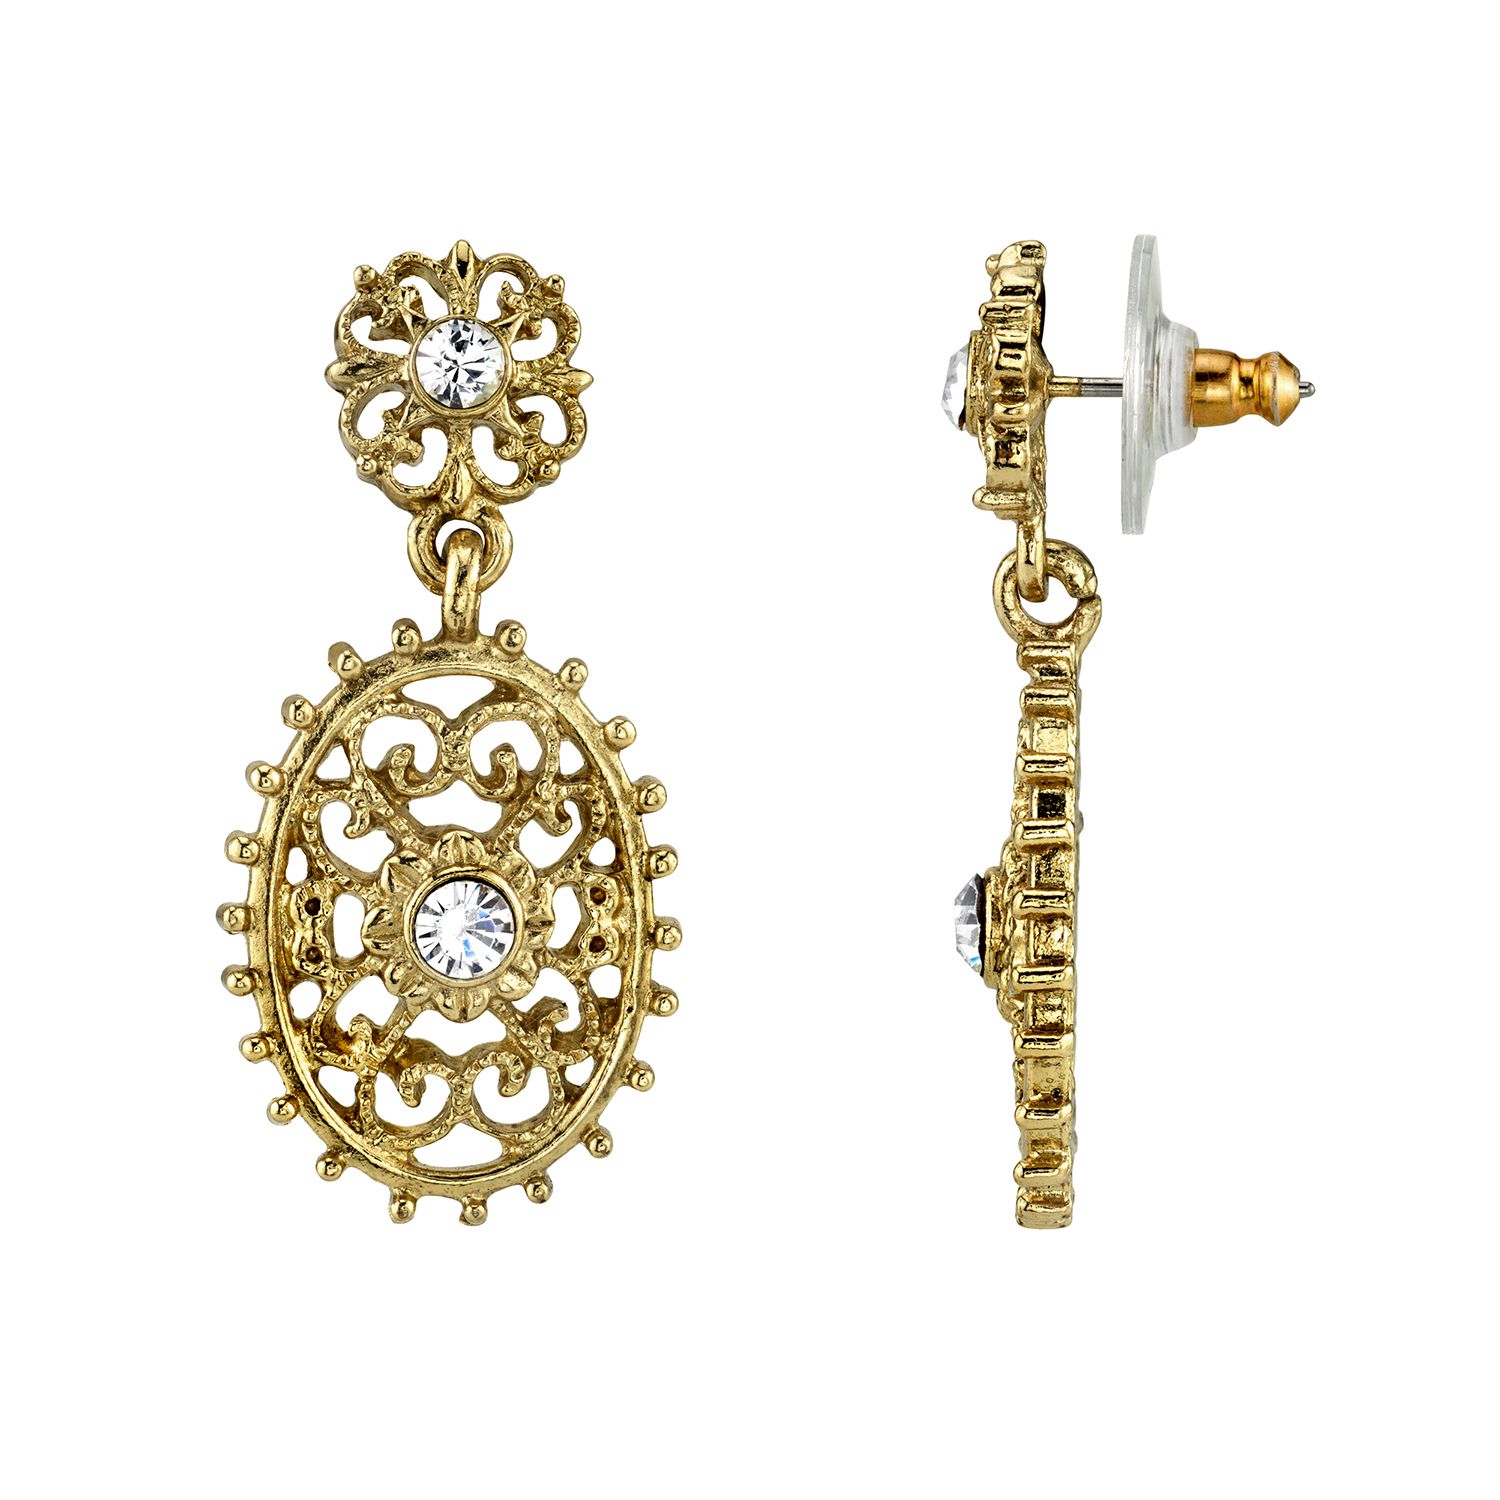 Image for Downton Abbey Simulated Crystal Filigree Drop Earrings at Kohl's.